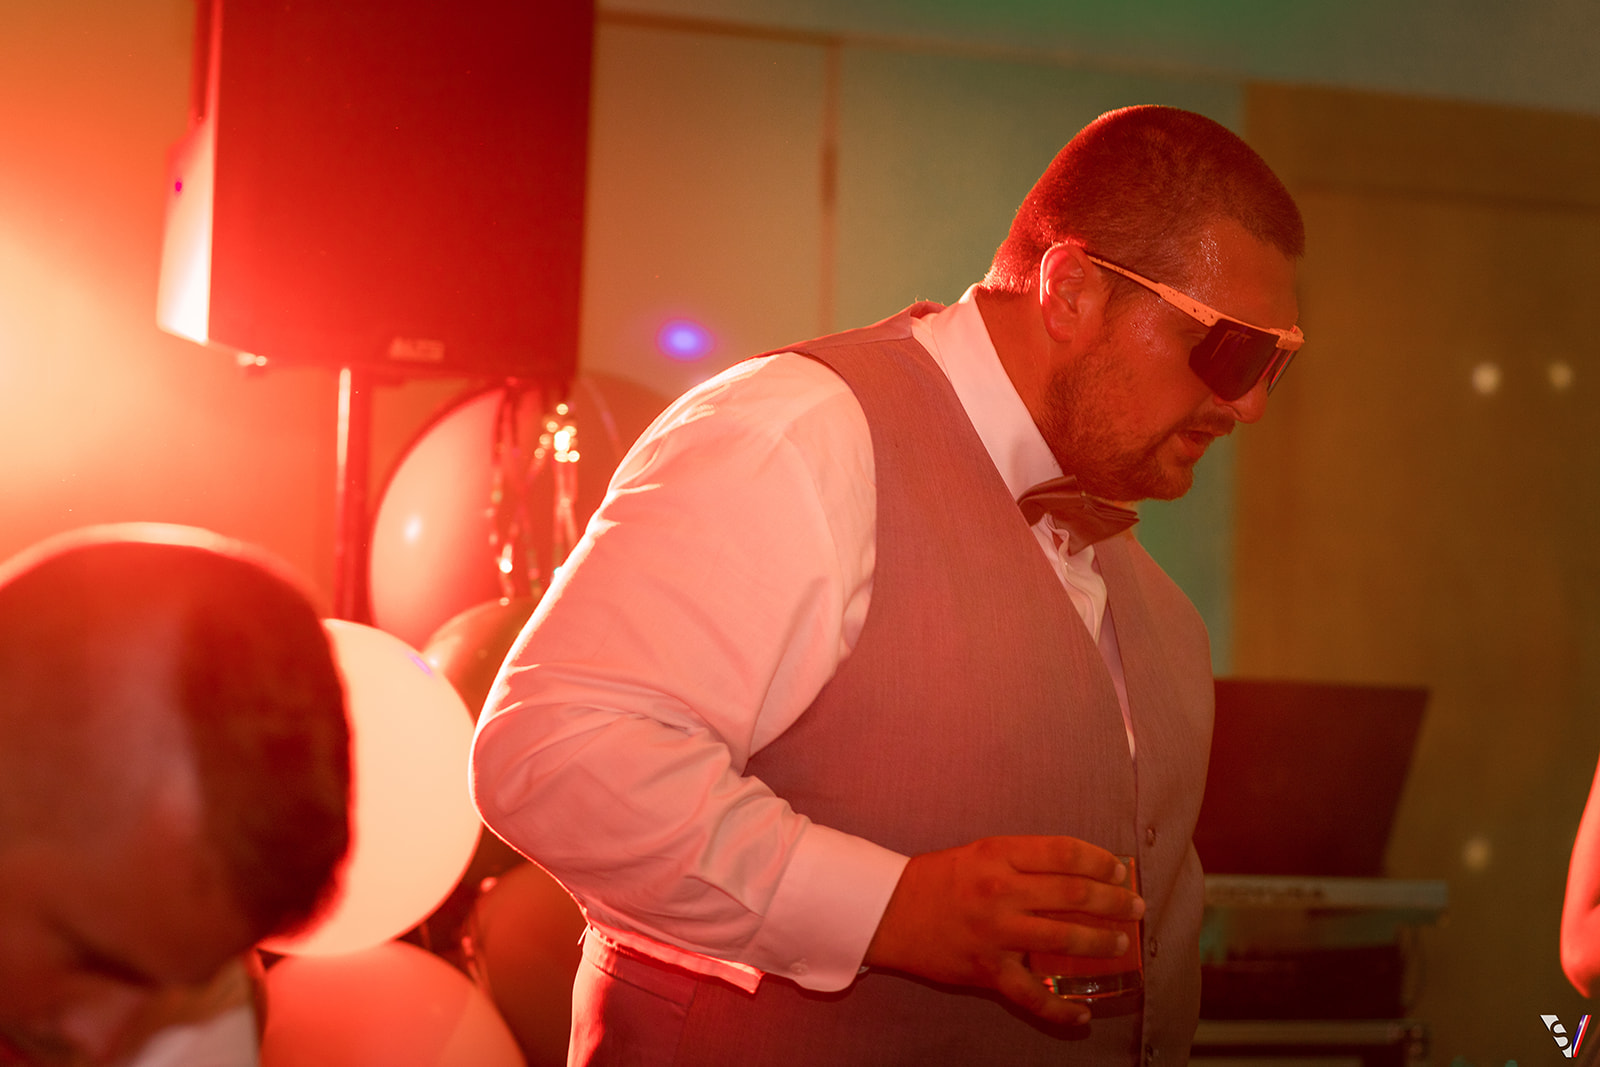 Transform your wedding into a colorful spectacle with sunglasses that dance with light.